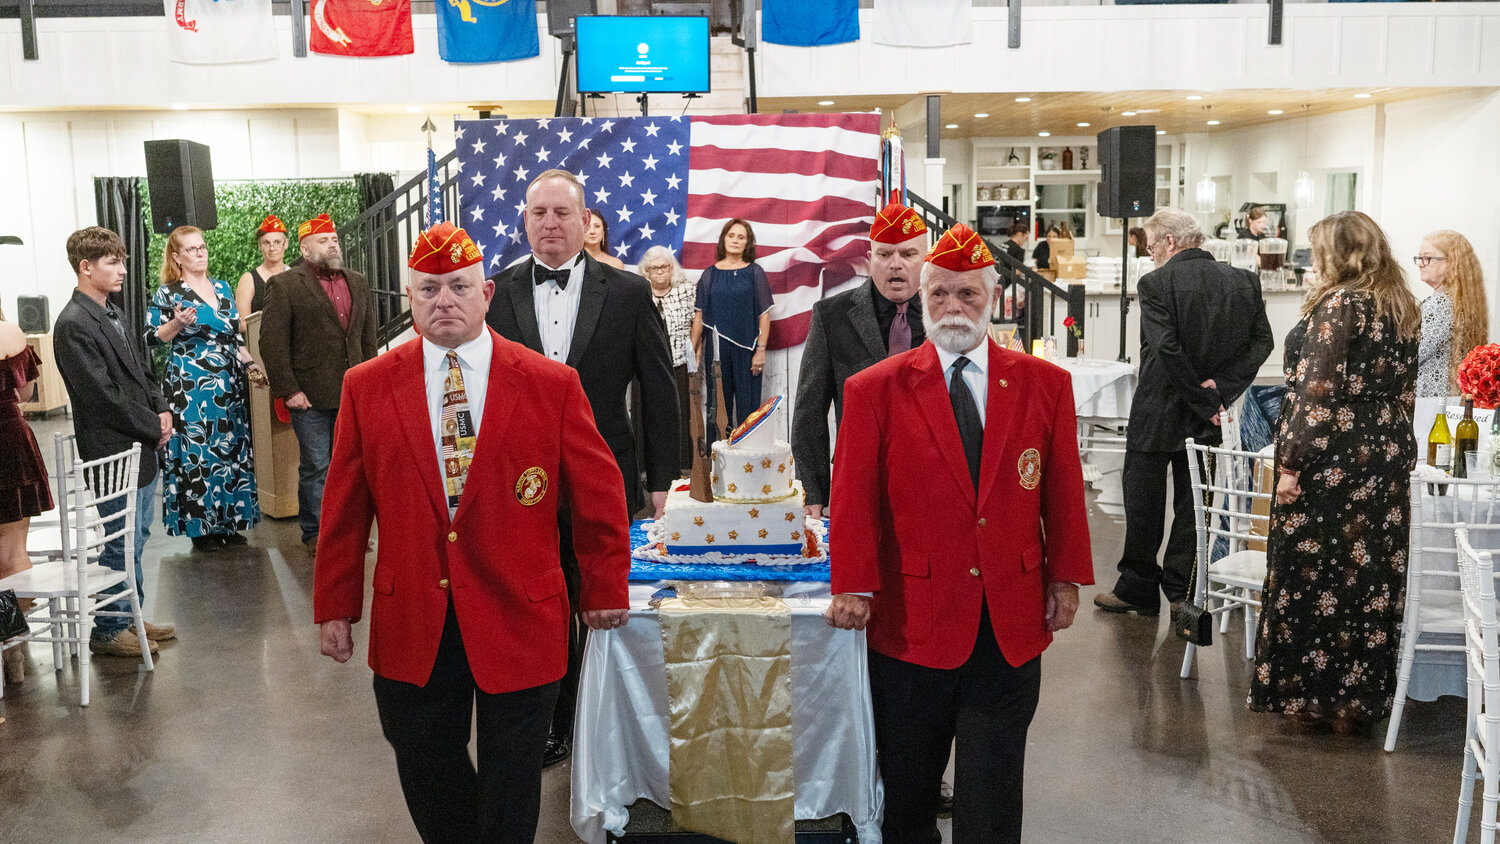 Carrying the birthday cake for the Marine Corps League Wood County detachment’s annual ball recently were, from left, Jr. Vice Commandant Wesley Marsh, Ted Willison, Sgt. Jim Biesheuvel and Sergeant-at-arms Jim Bailey. Honored guests traditionally receive the first slices, and this year’s were Gold Star mothers Brenda Powell and Teresa Melton and Gold Star sister Misty Goldman.